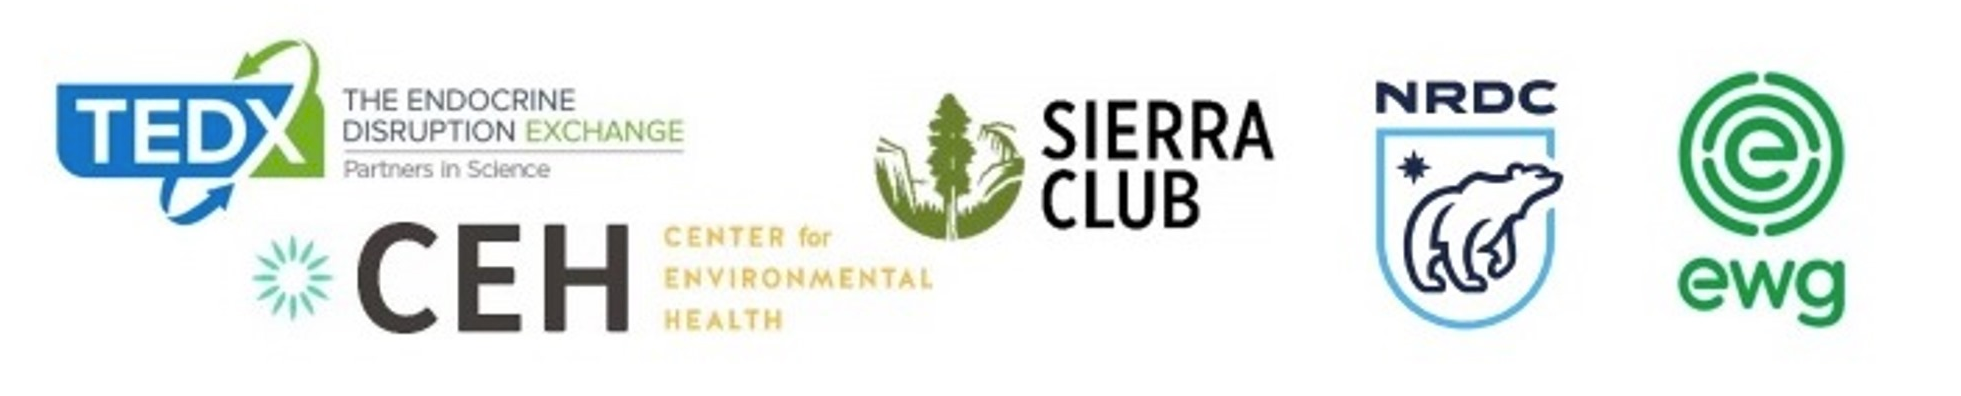 The Sierra Club, The Endocrine Disruptor Exchange, NRDC, EWG and Center for Environmental Health